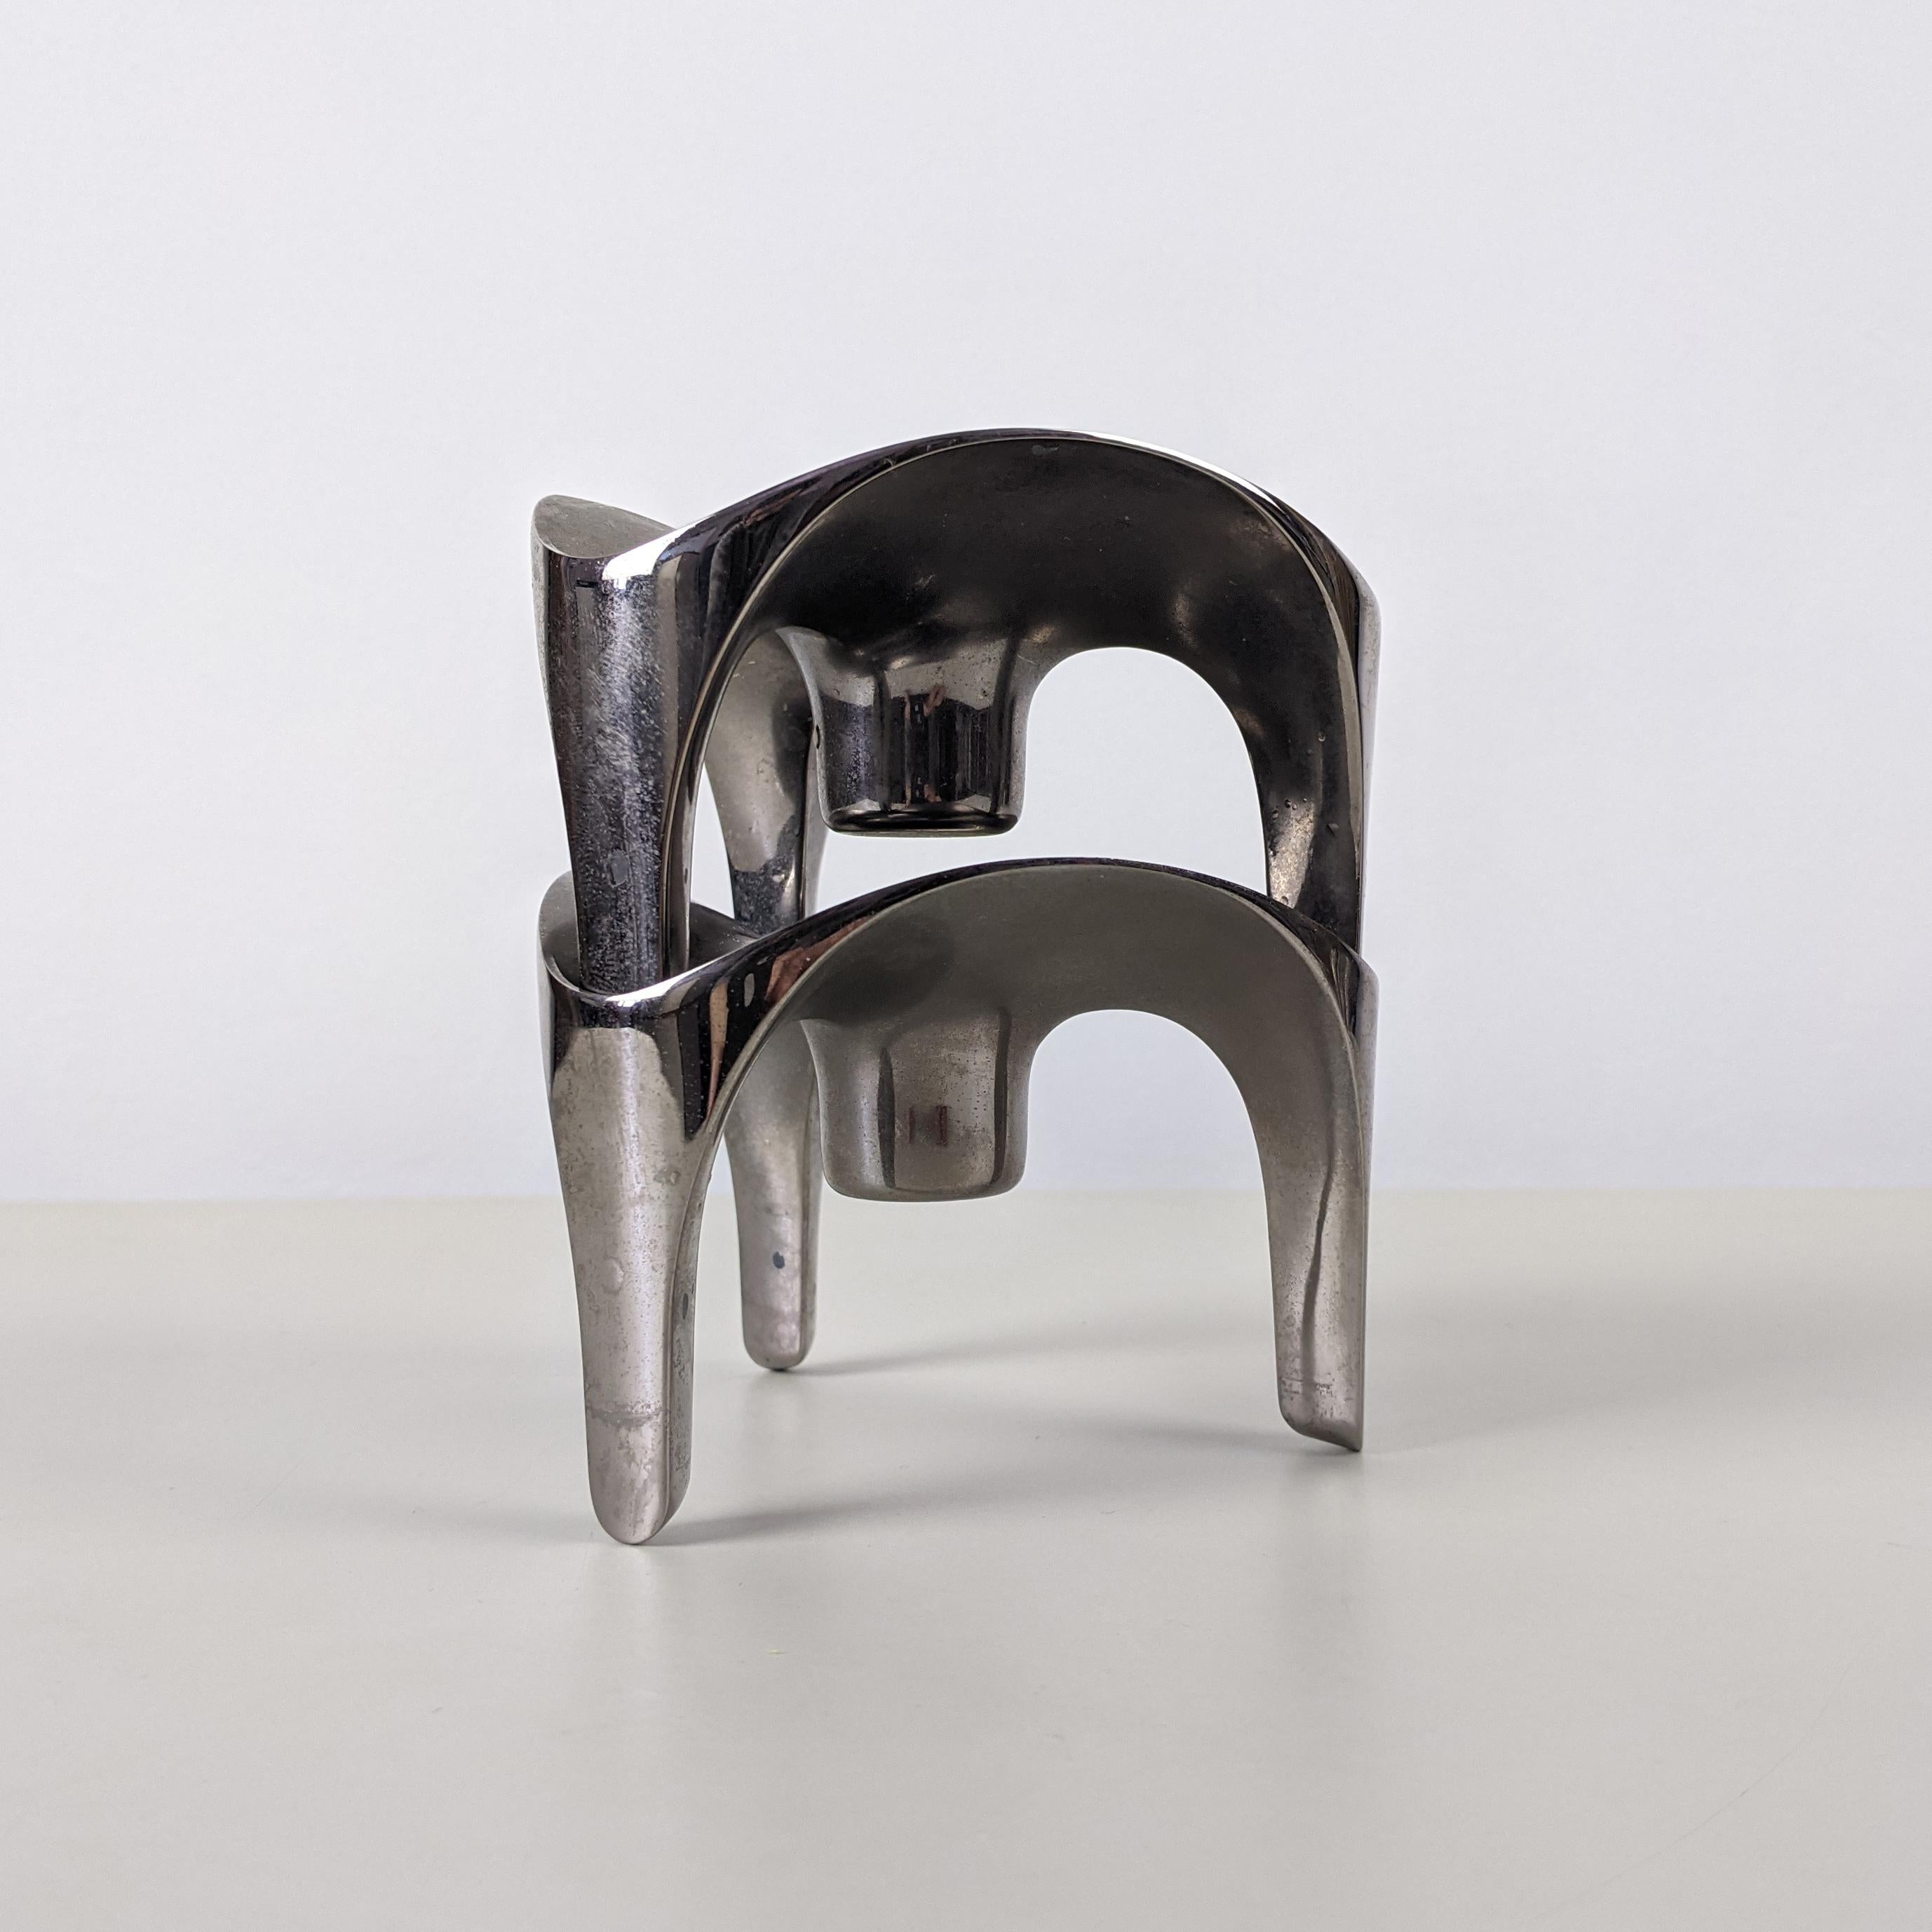 Caesar Stoffi for Fritz Nagel c. 1970
2 modular stacking elements/candleholders

Polished metal
Good condition but with some surface tarnish
Original box
Please note, we prefer these pieces un-polished with their original patina. They could,